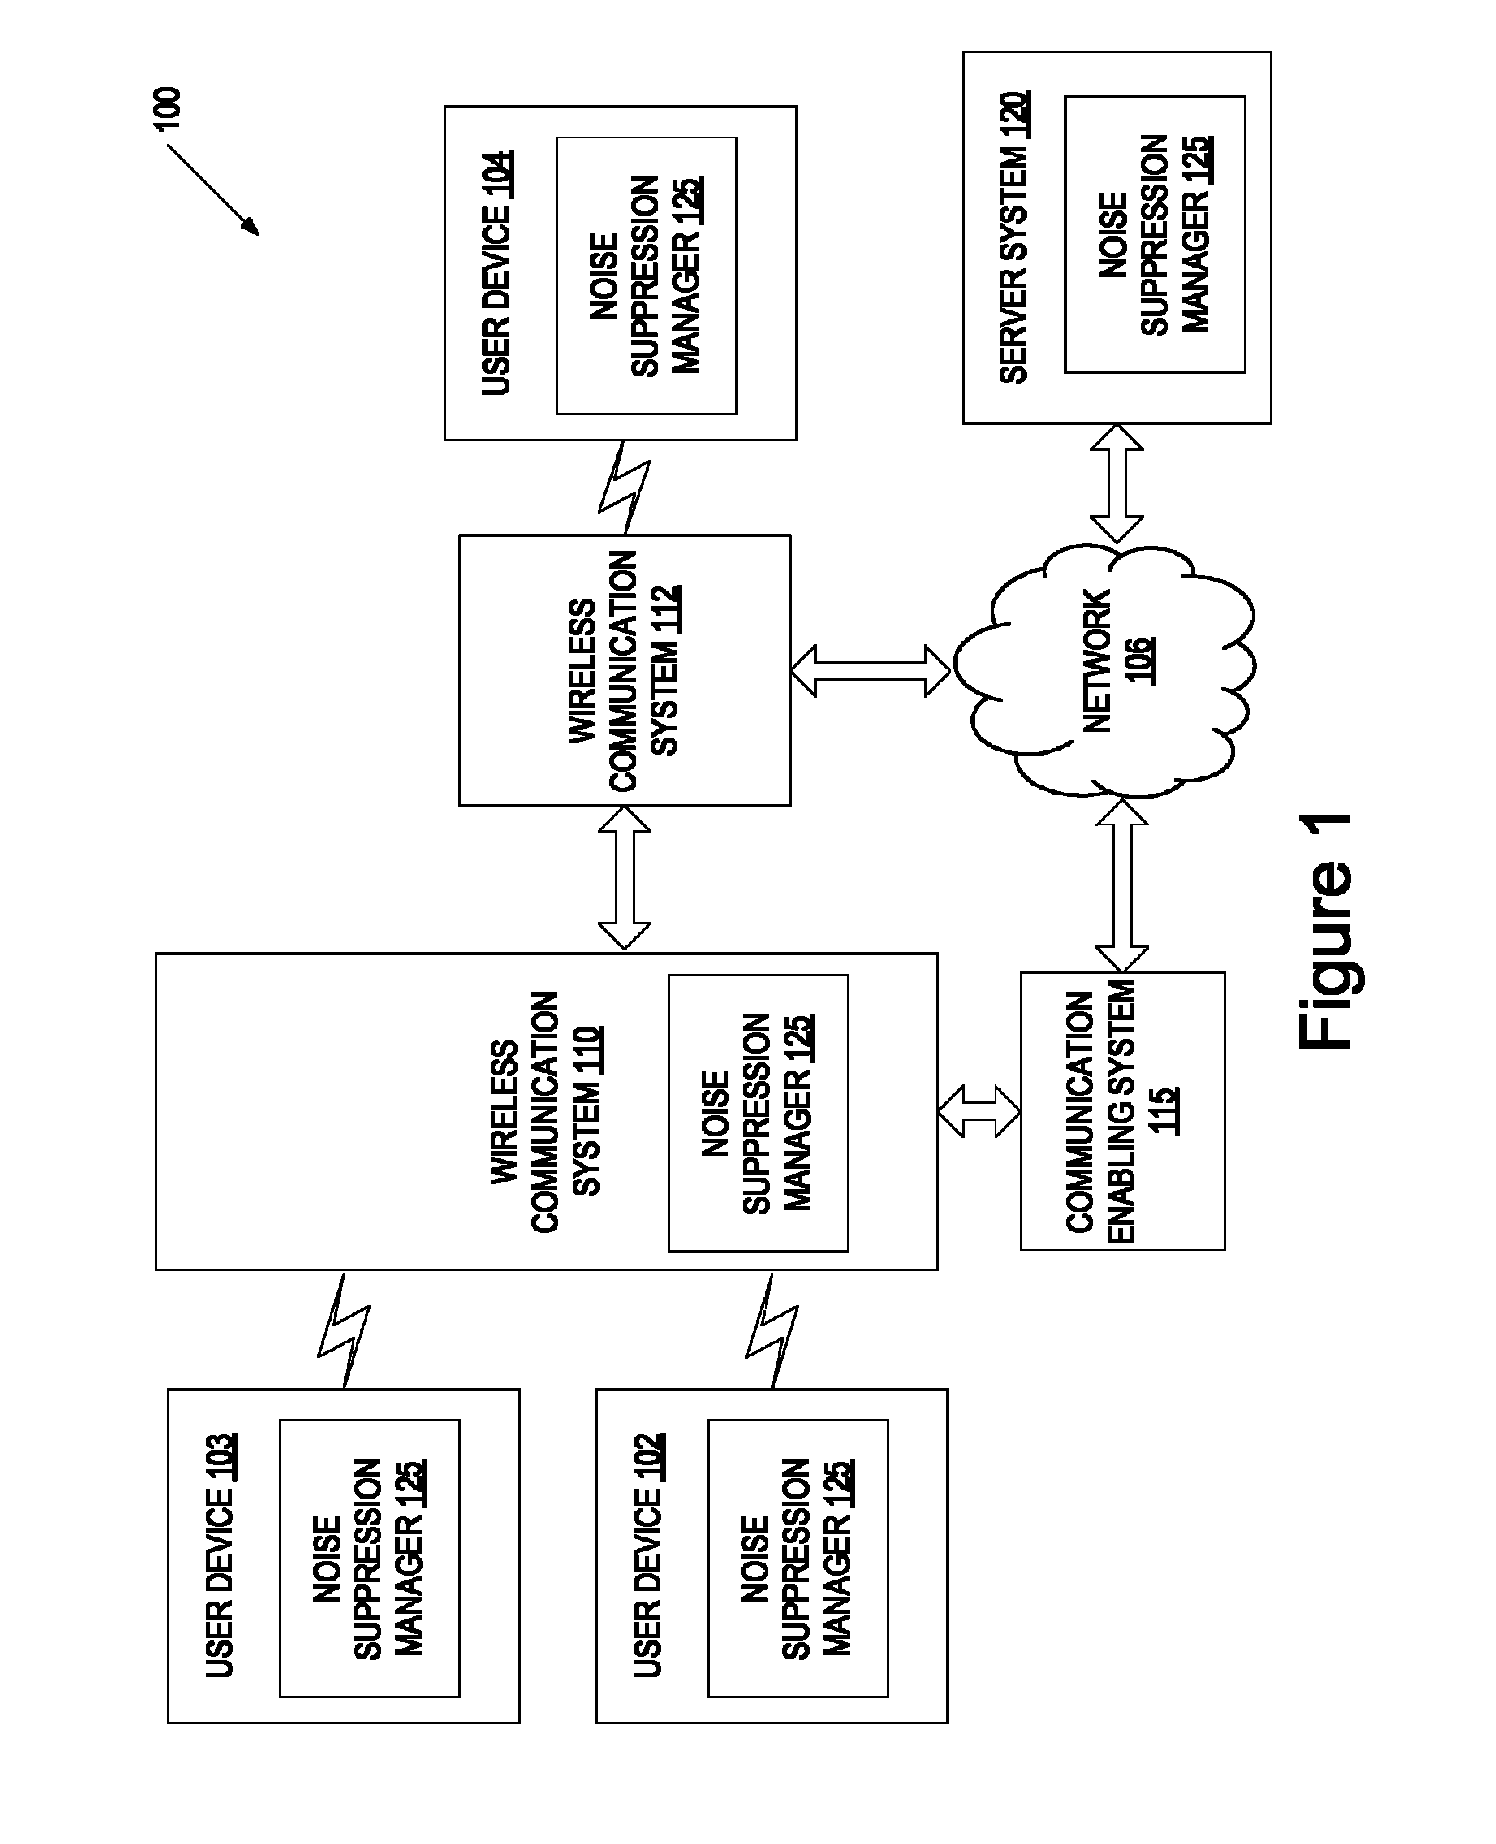 Transmission of noise compensation information between devices